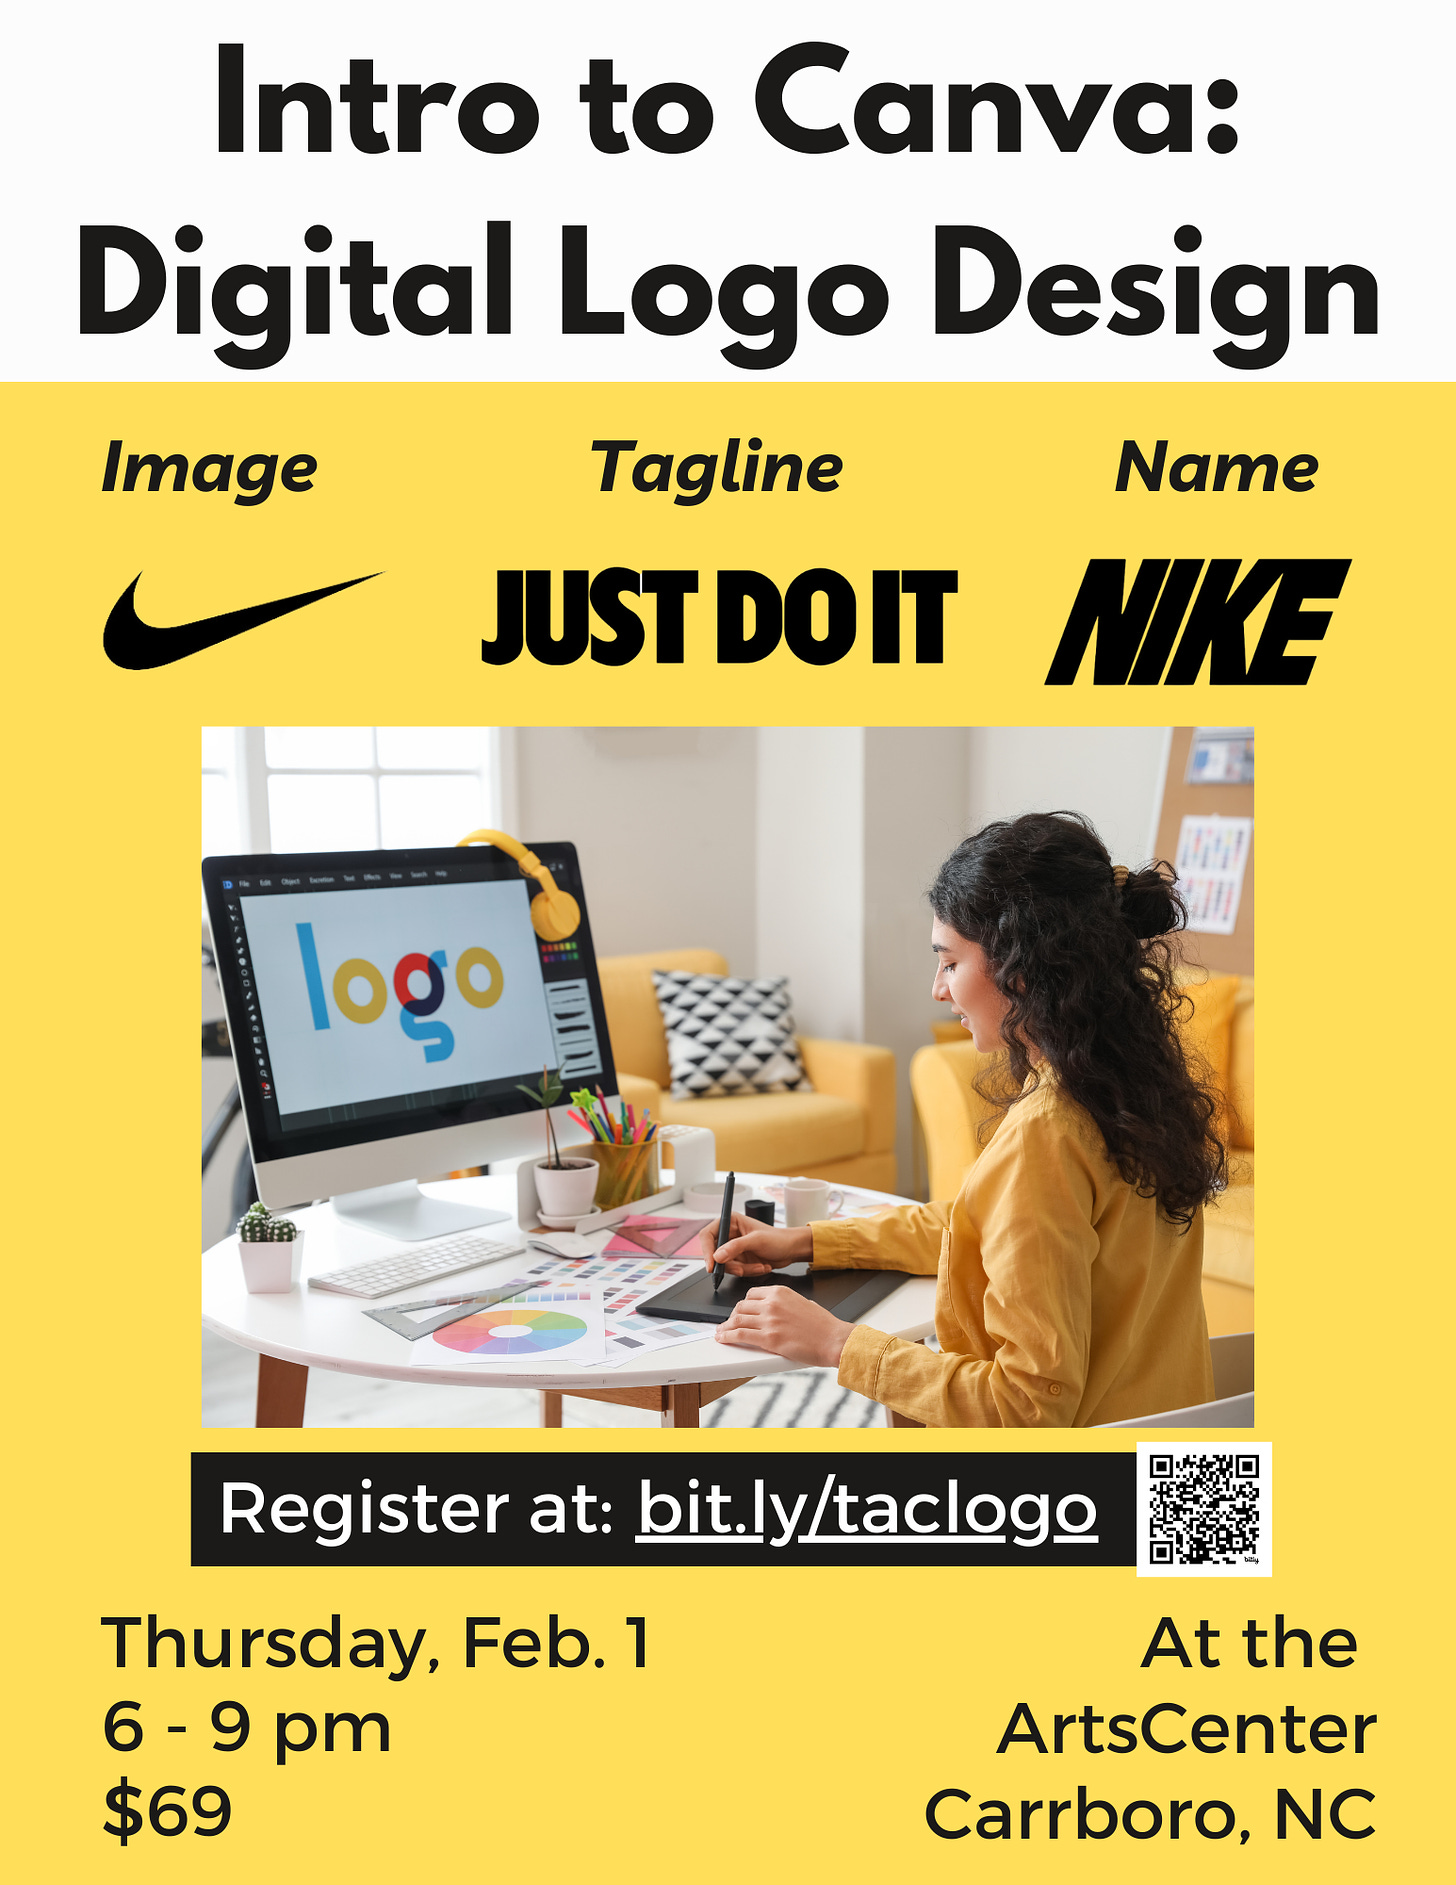 Promo Poster for Intro to Canva: DIgital Logo Design with an example of the Nike symbol, brand name, and tagline, a photo of a person working on a computer, and the information about the class (listed below).